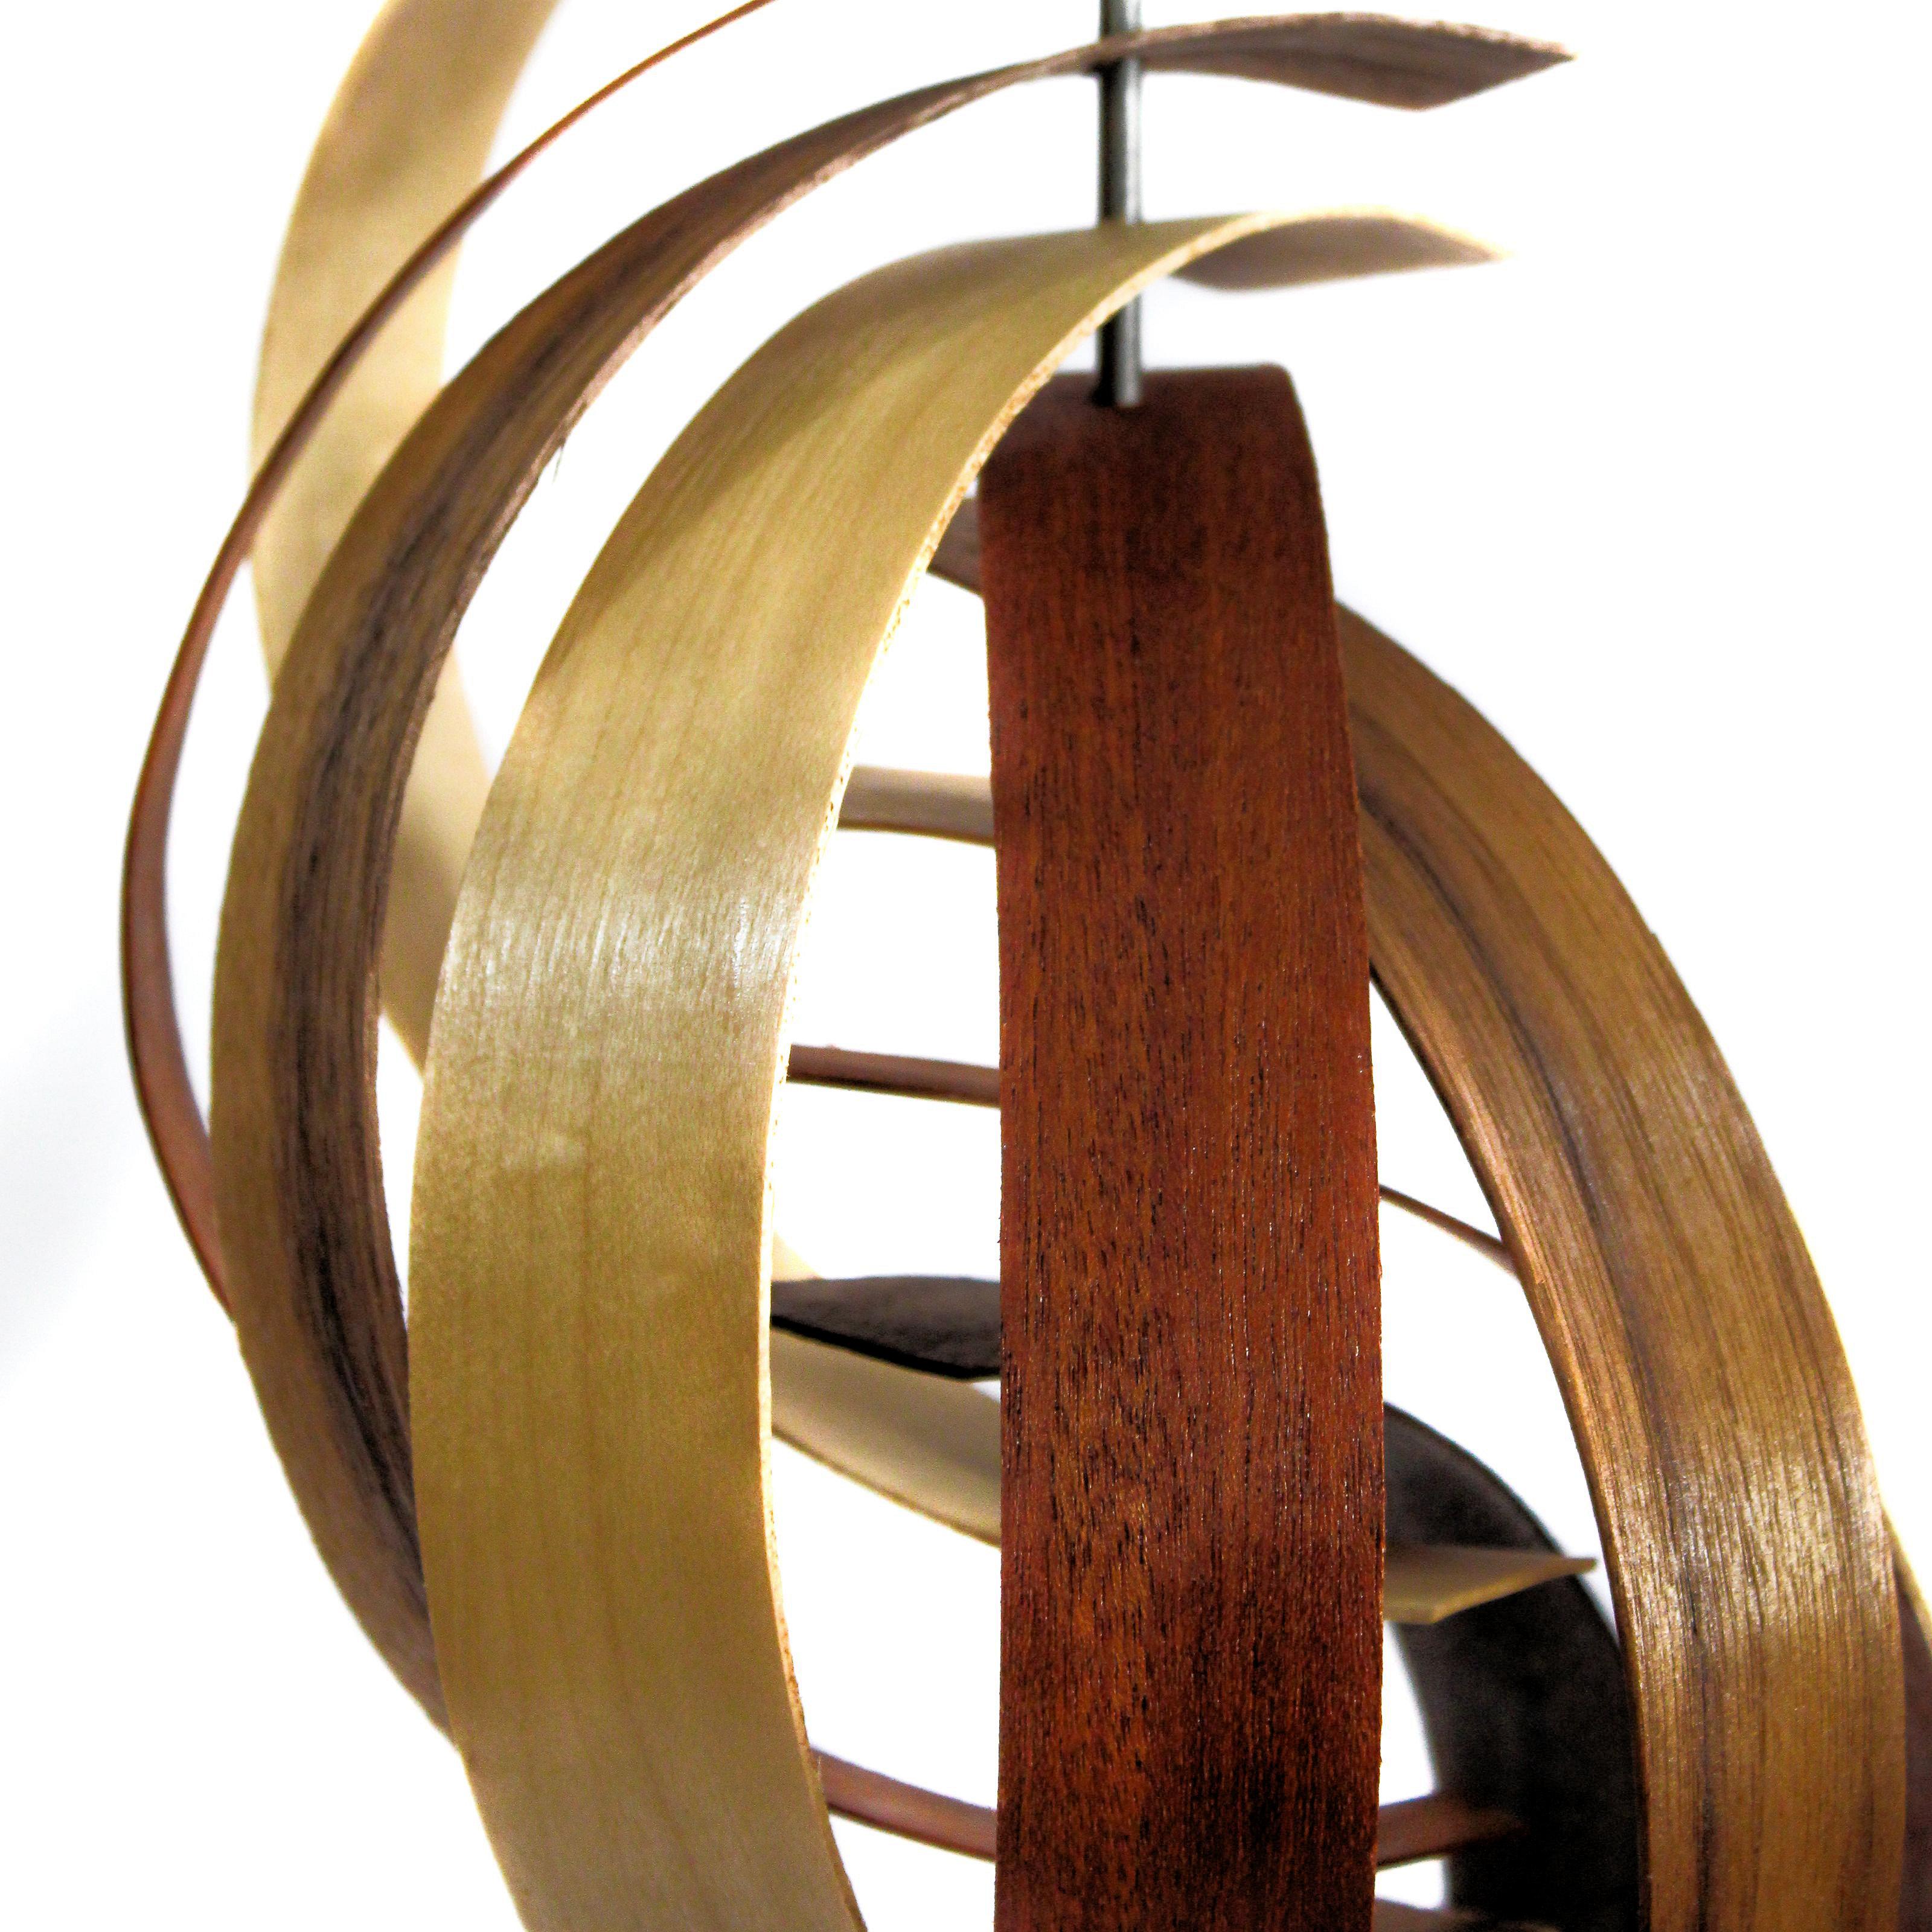 Description:  This sculpture consists of three tones of pre-formed walnut slats in a nautilus pattern. Walnut base. This sculpture is an open-edition multiple original; hand-made by the artist.
Title: Reach

Artist Bio:
Jeff was born and raised in